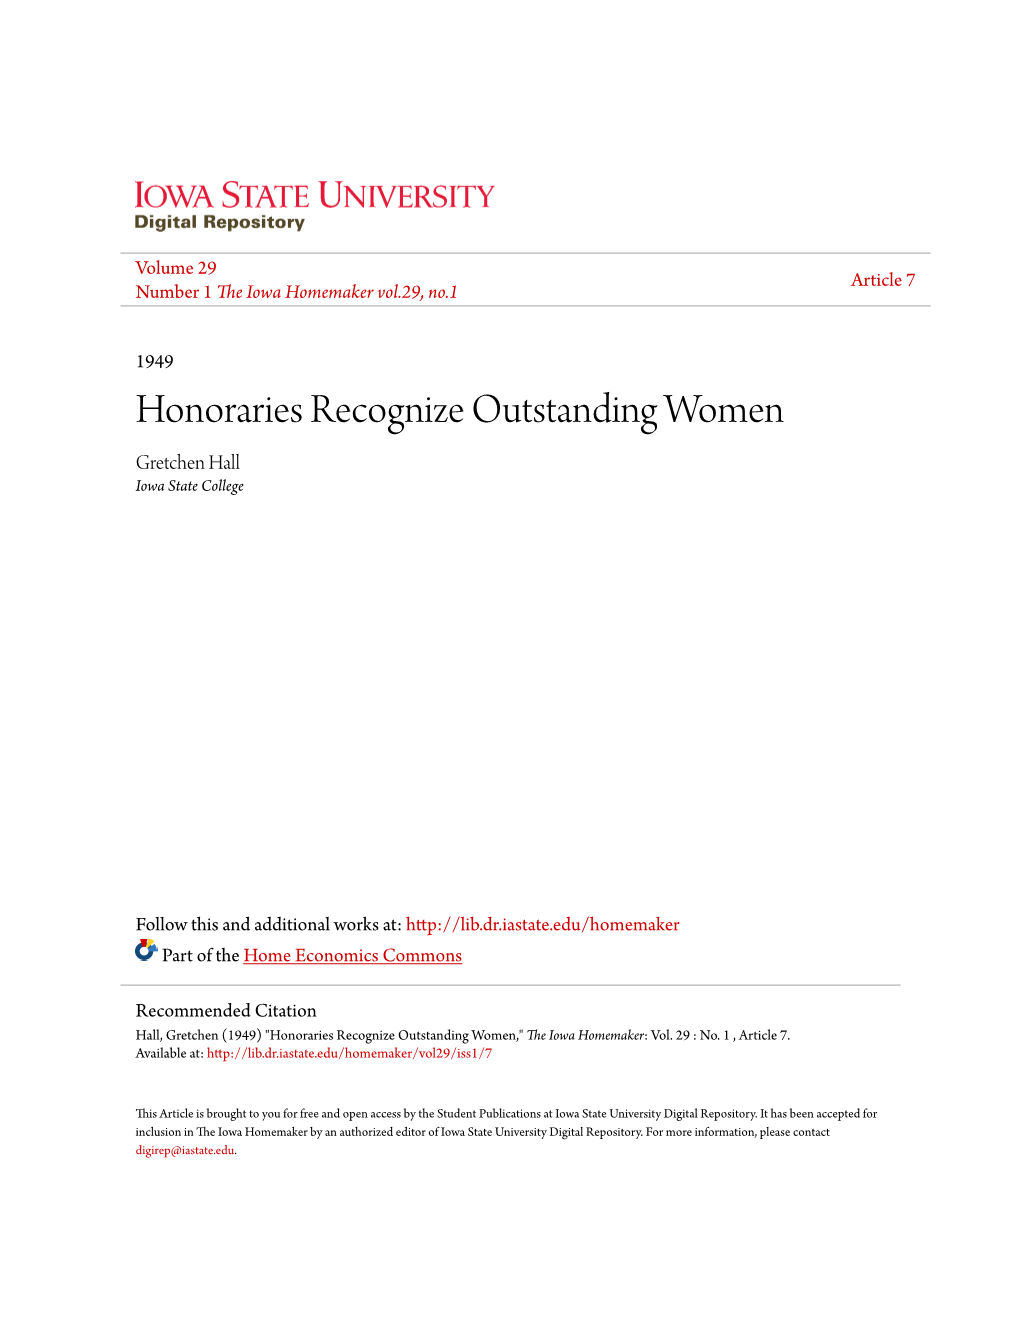 Honoraries Recognize Outstanding Women Gretchen Hall Iowa State College